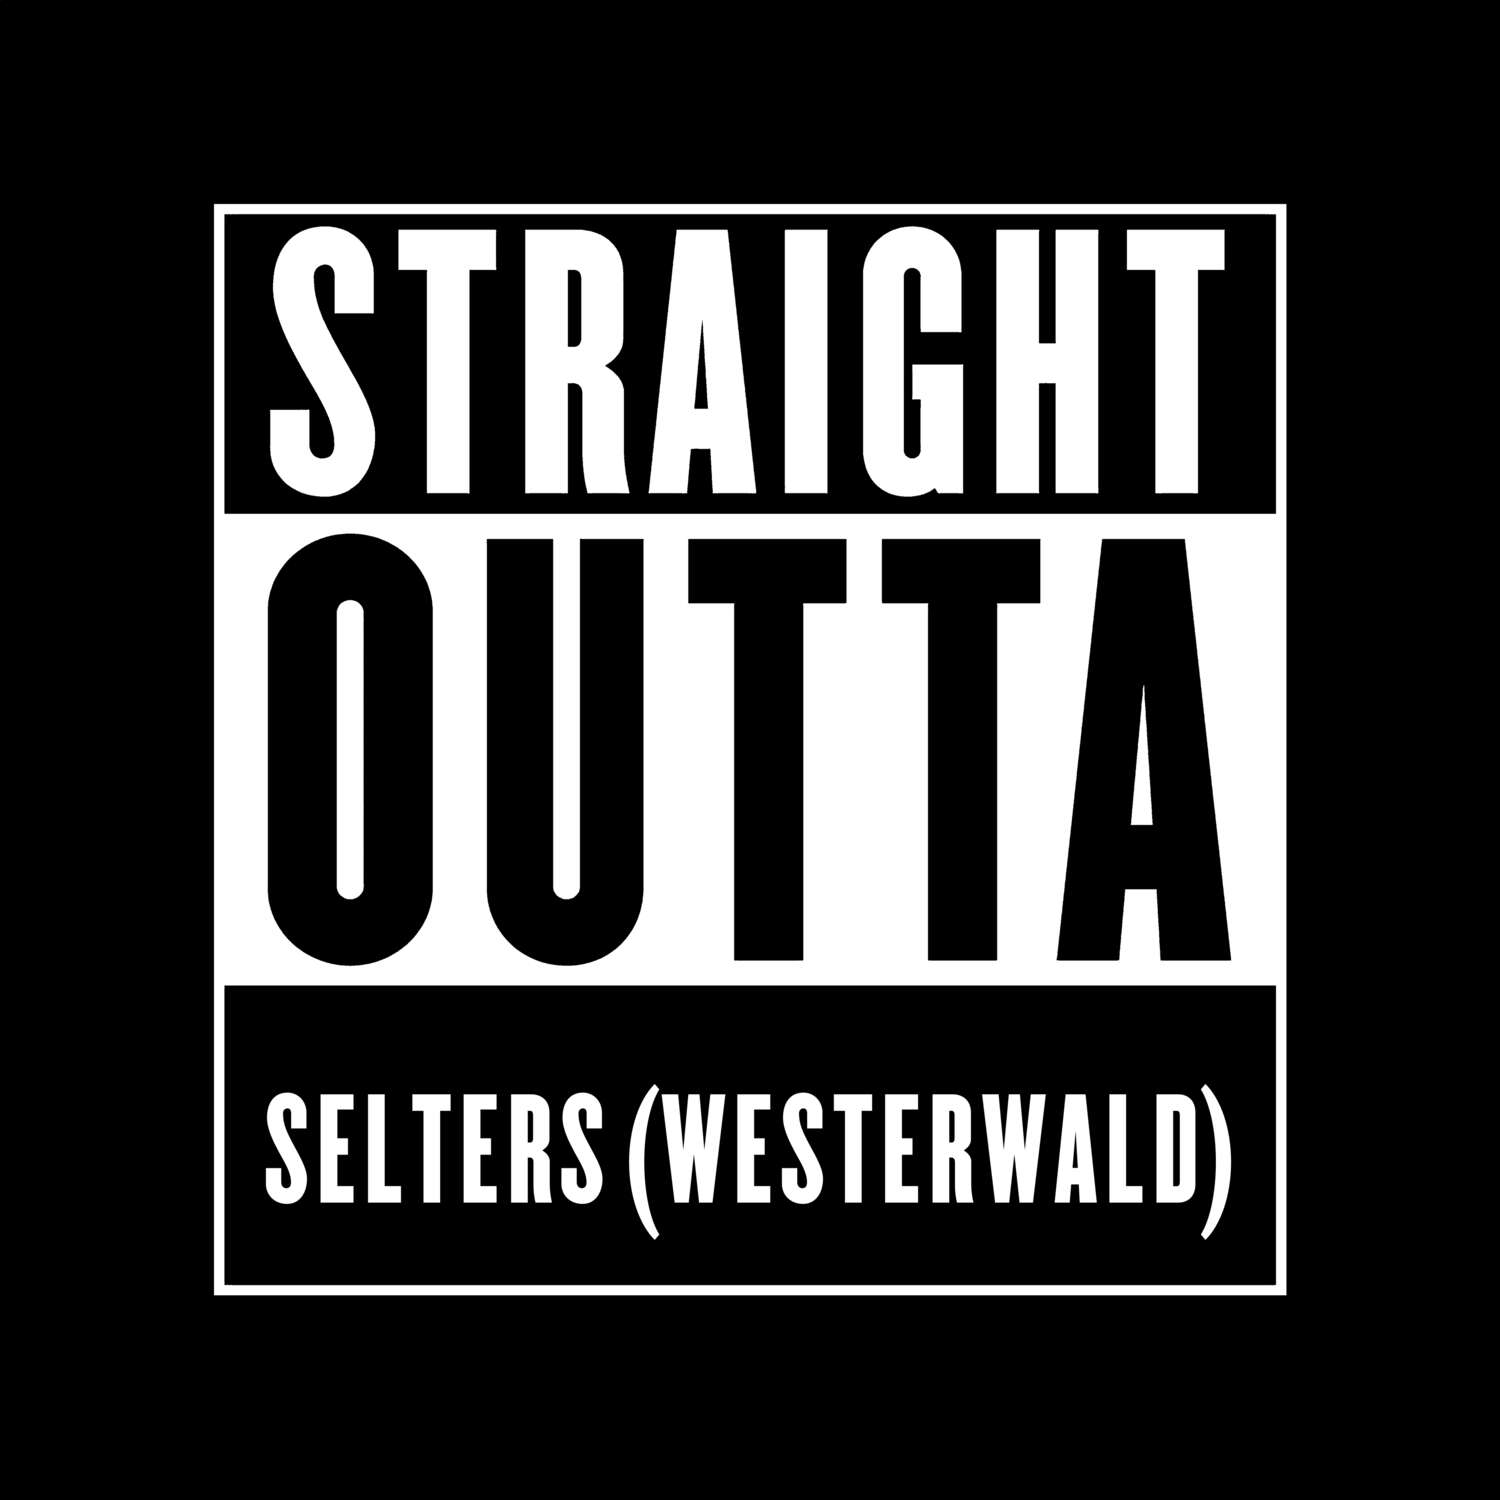 Selters (Westerwald) T-Shirt »Straight Outta«